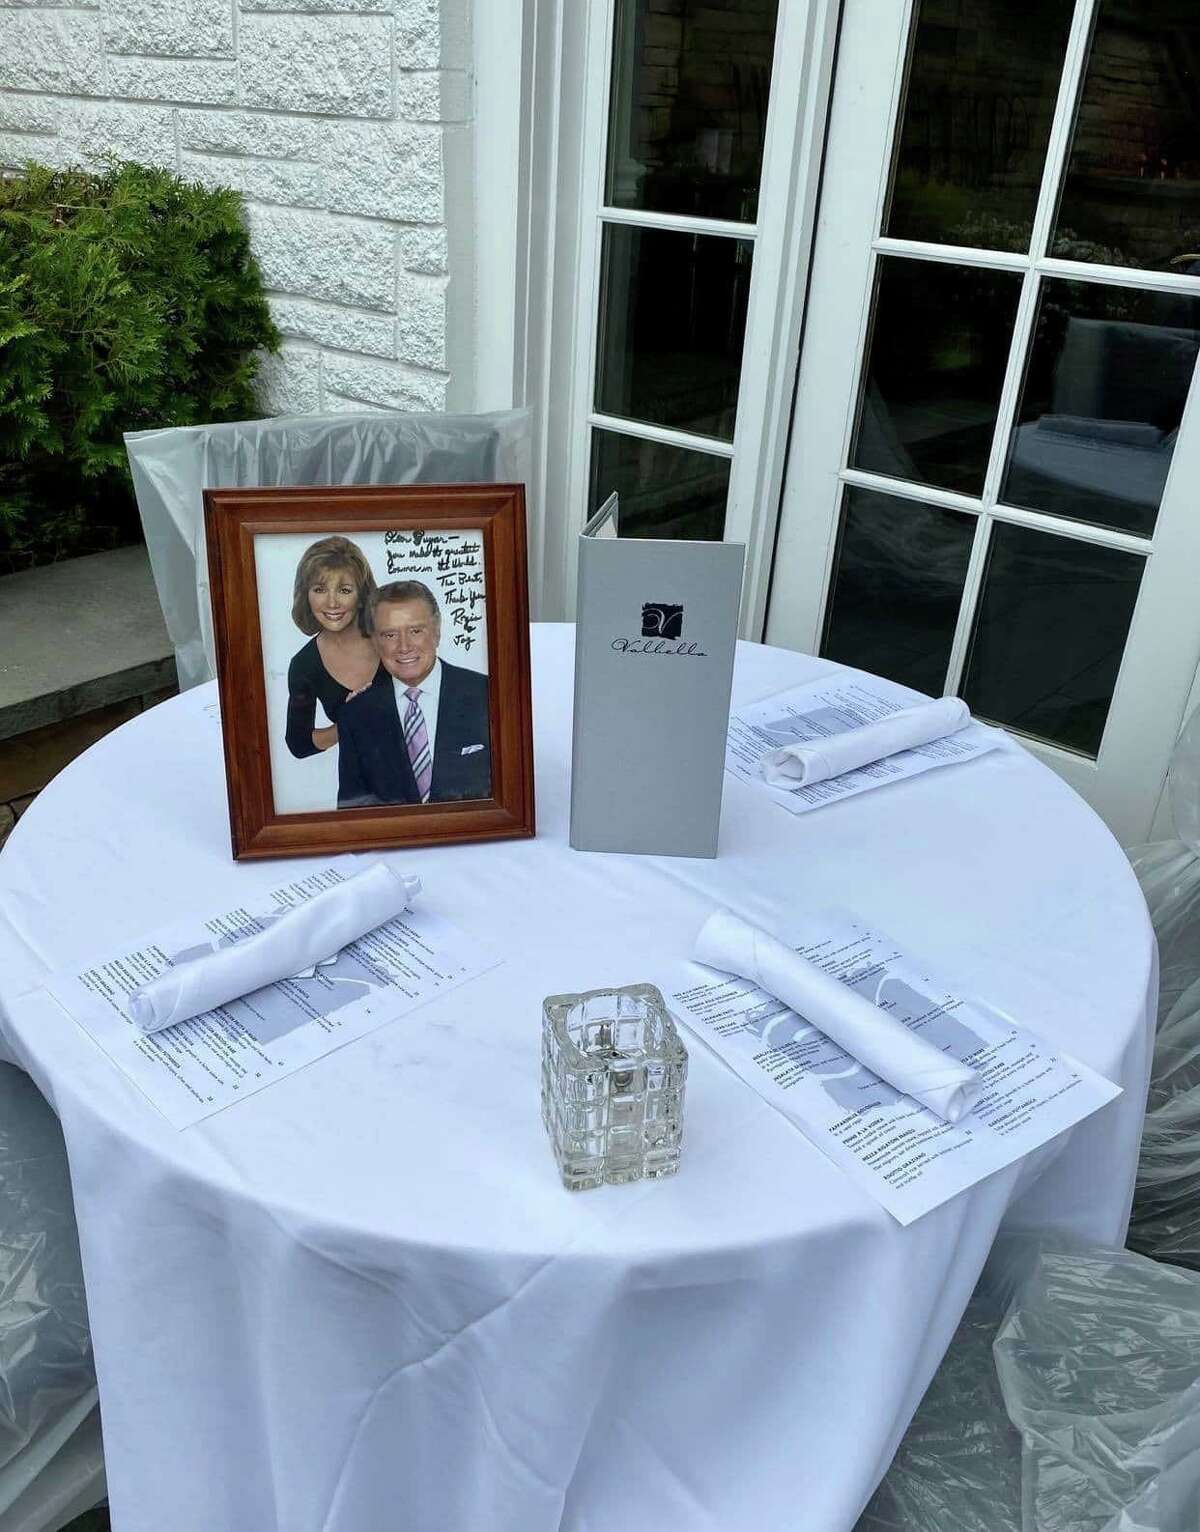 Valbella in Greenwich keeps the table open for Regis Philbin on Saturday night. The iconic talk show host was a longtime town resident and regular at the local restaurant. Philbin died Friday at the age of 88.